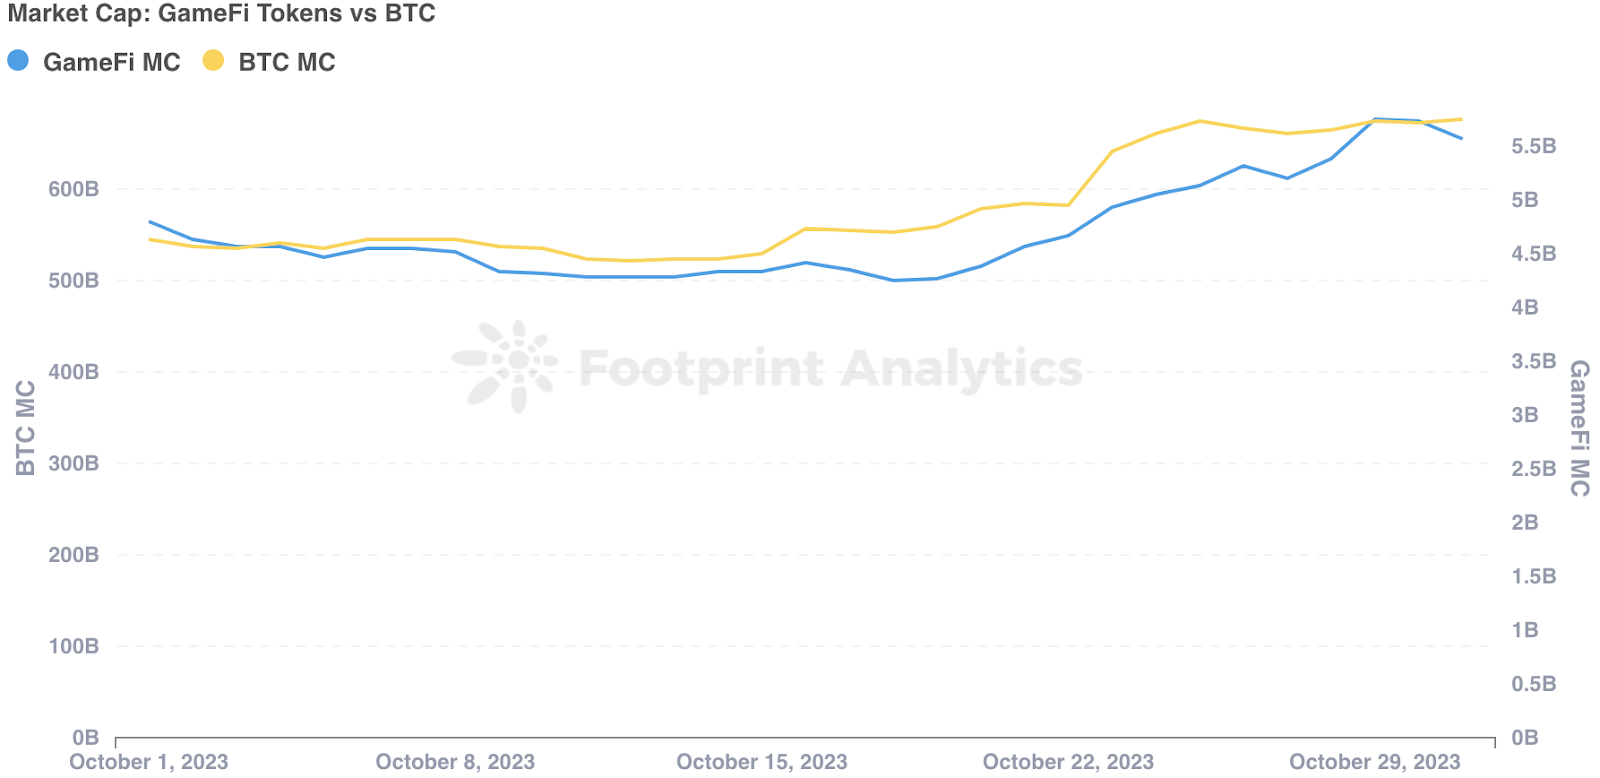 October Web3 Gaming Industry Faces User Acquisition Challenges Despite Market Cap Growth